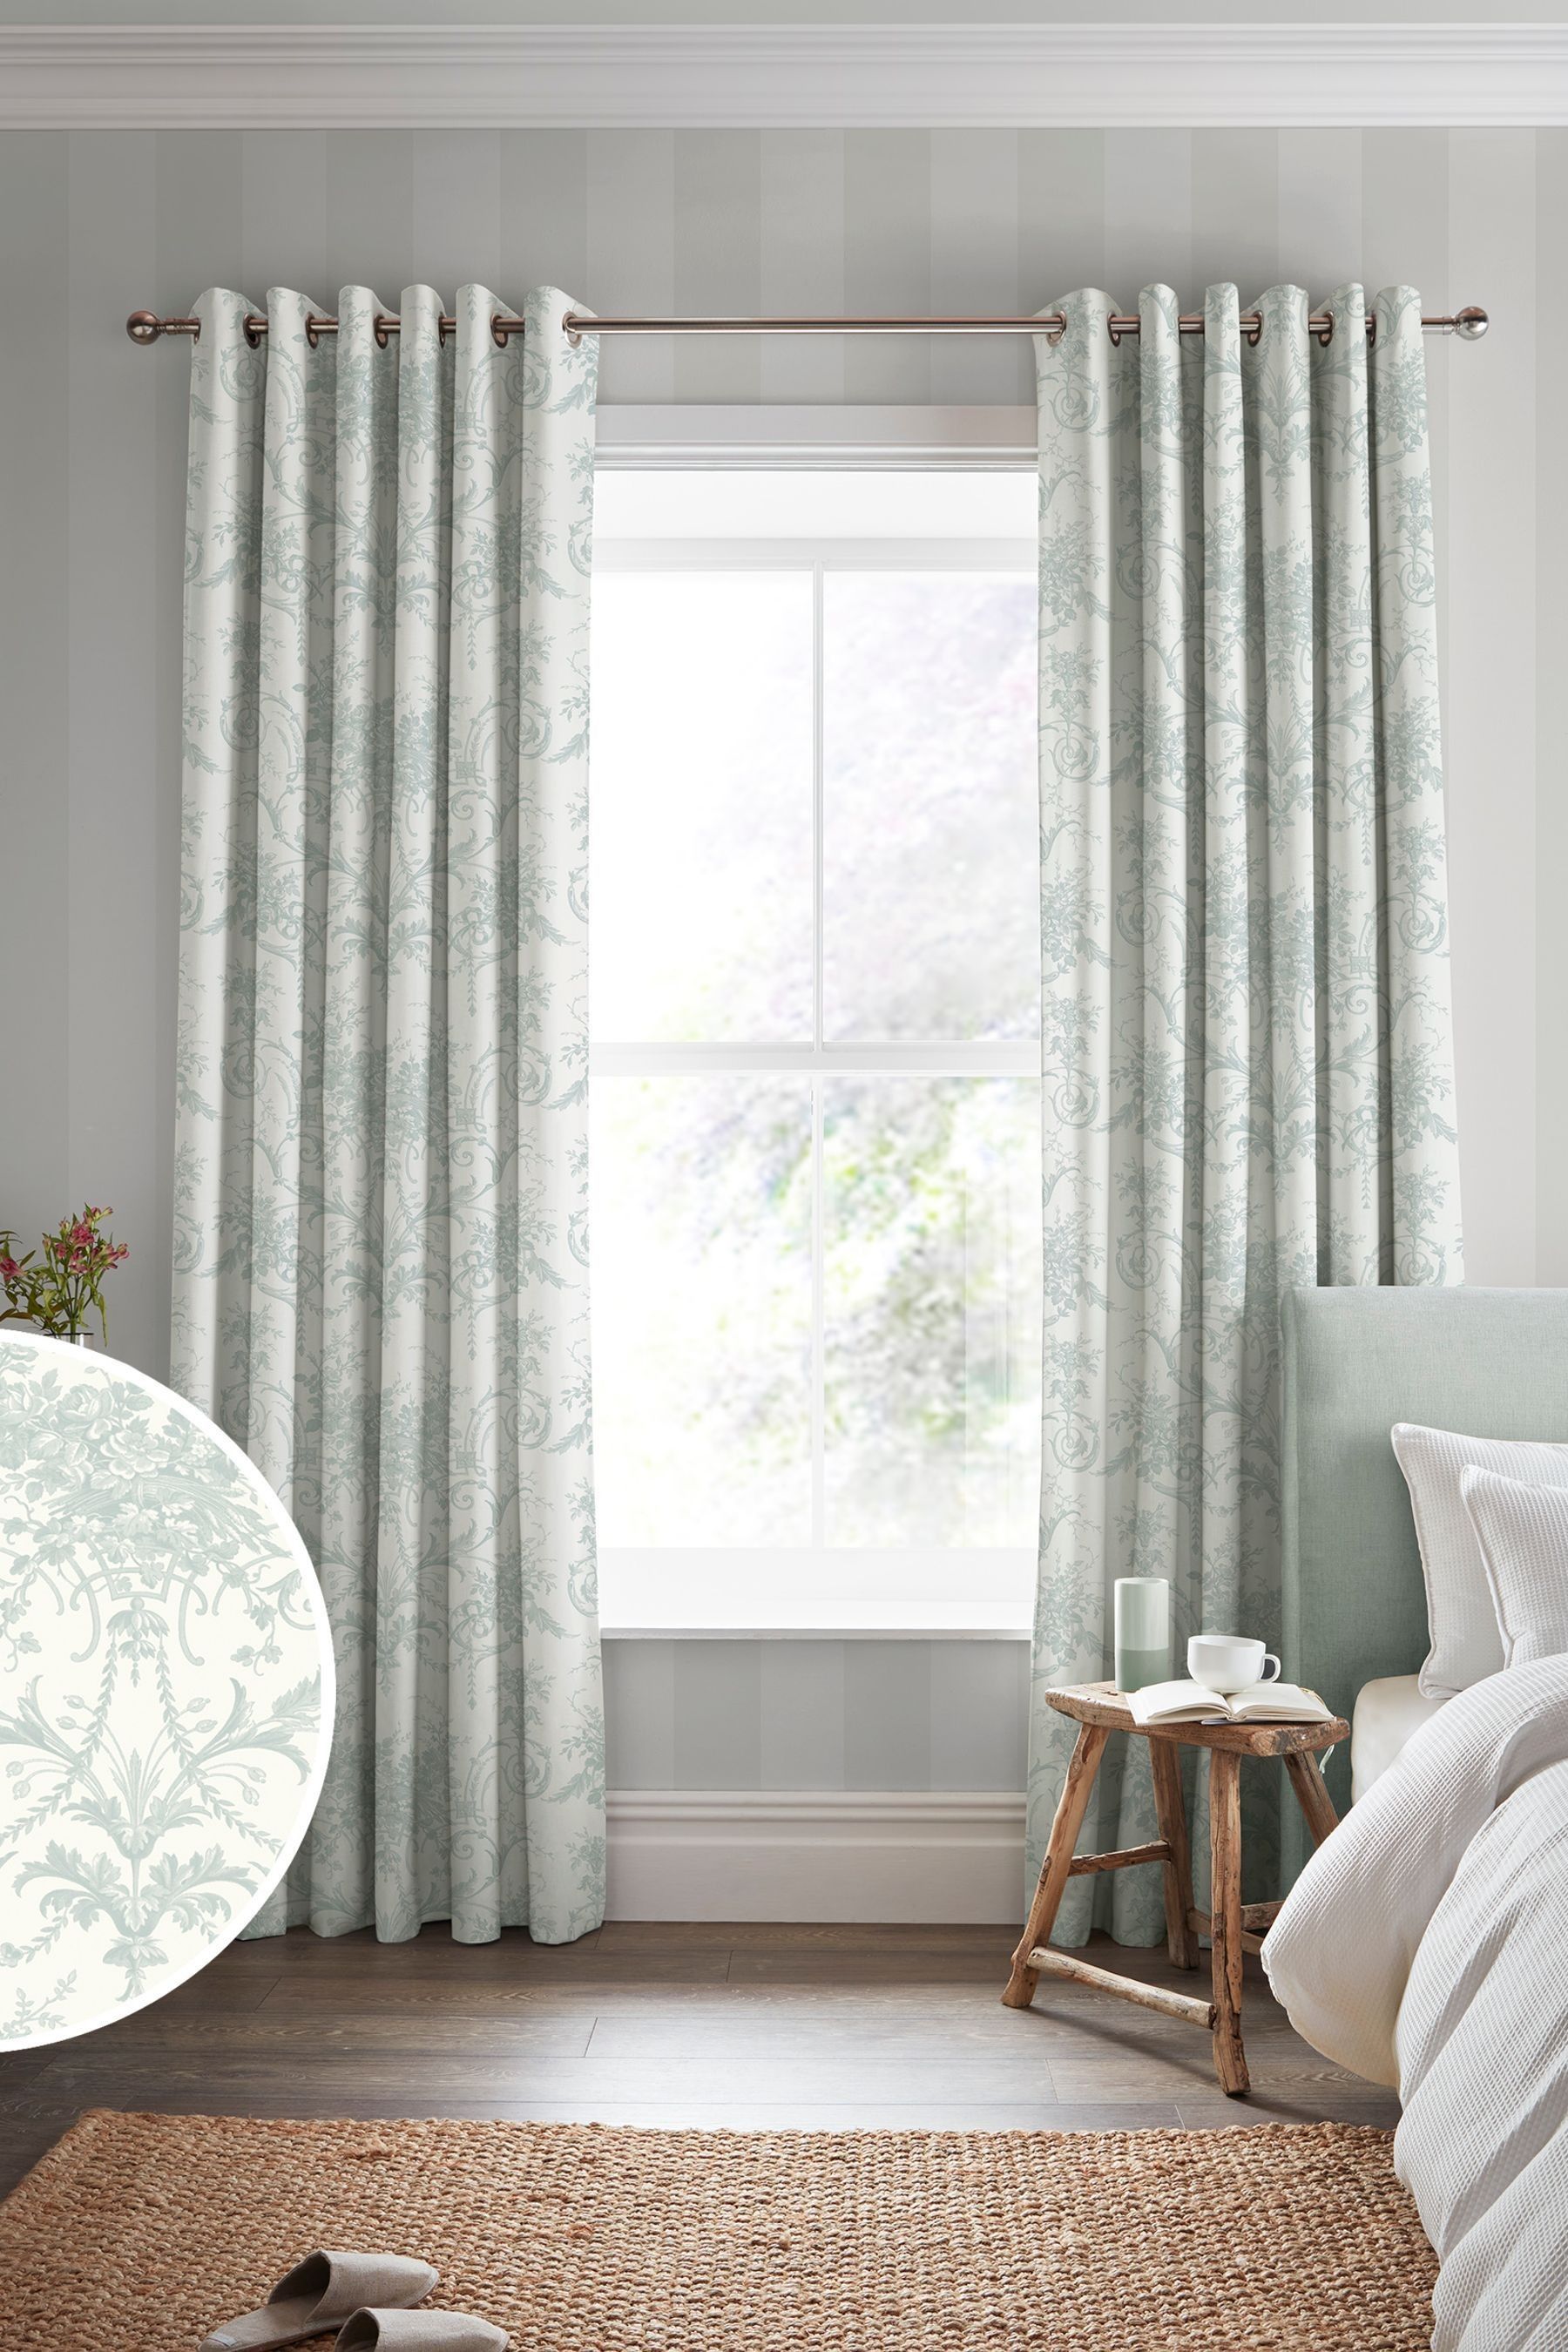 Buy Laura Ashley Duckegg Tuileries Made To Measure Curtains from the ...